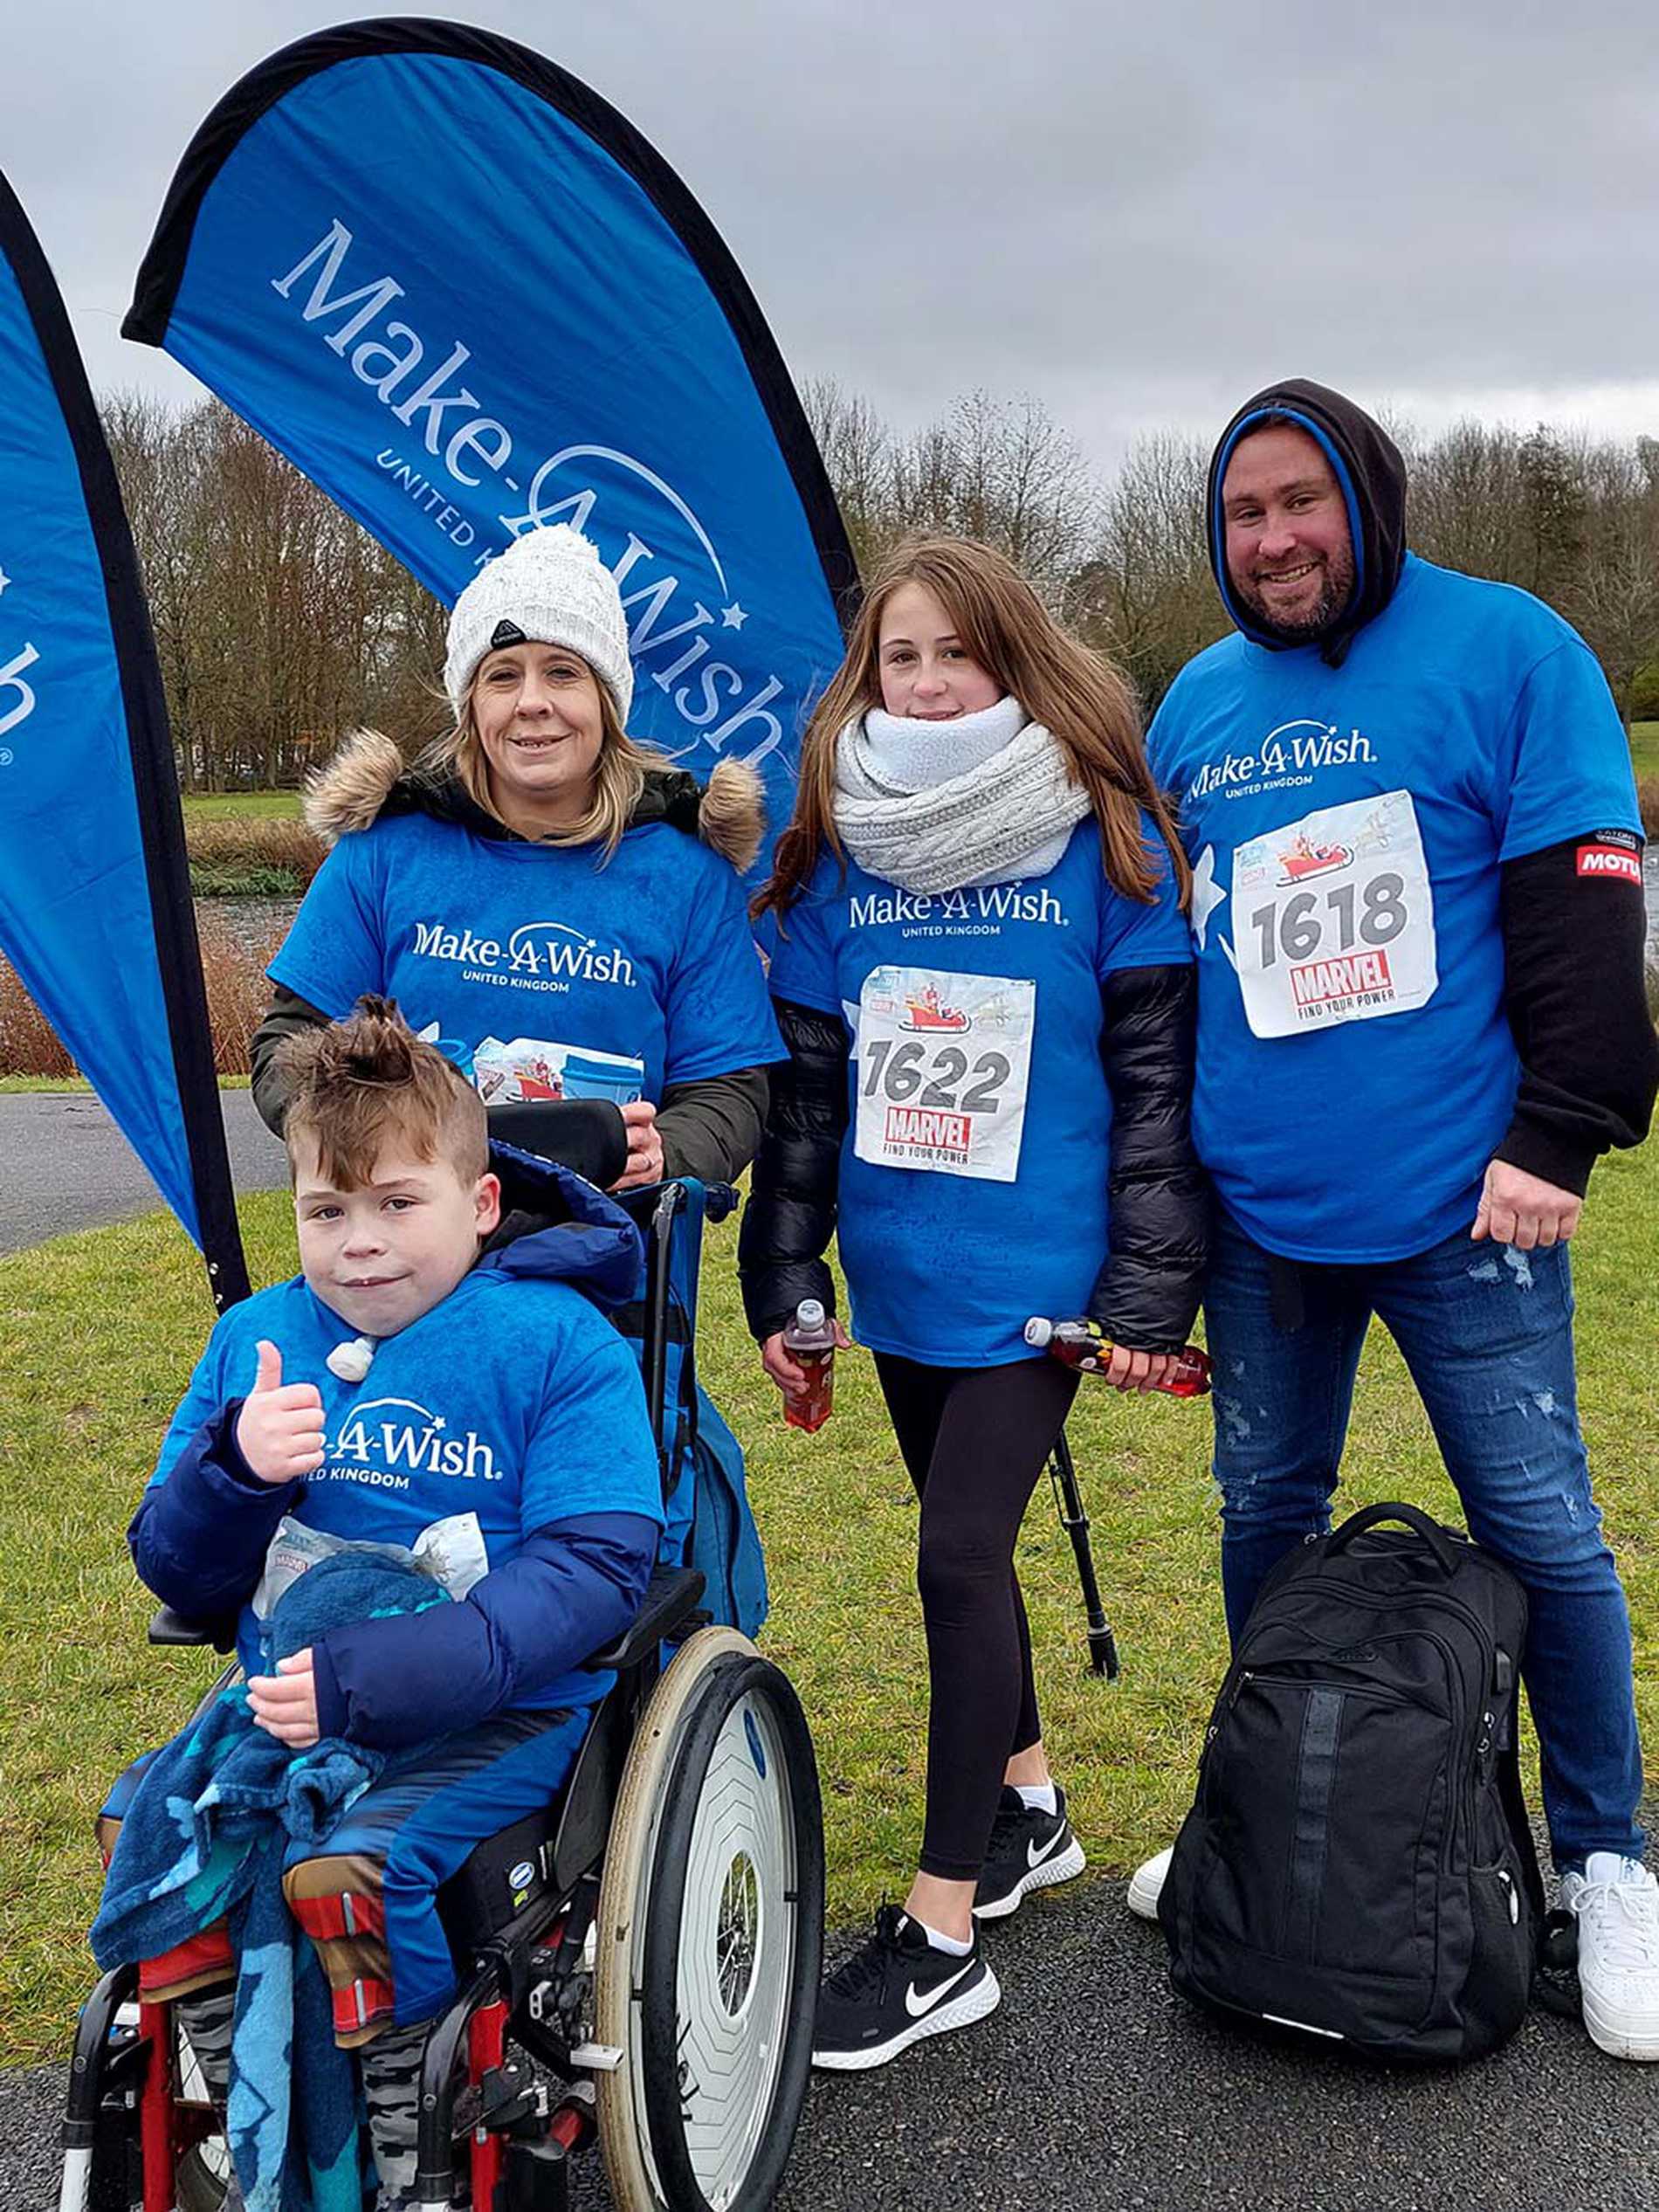 Wish child, Mikey and his family taking part in the 2021 Superhero Tri challenge event.